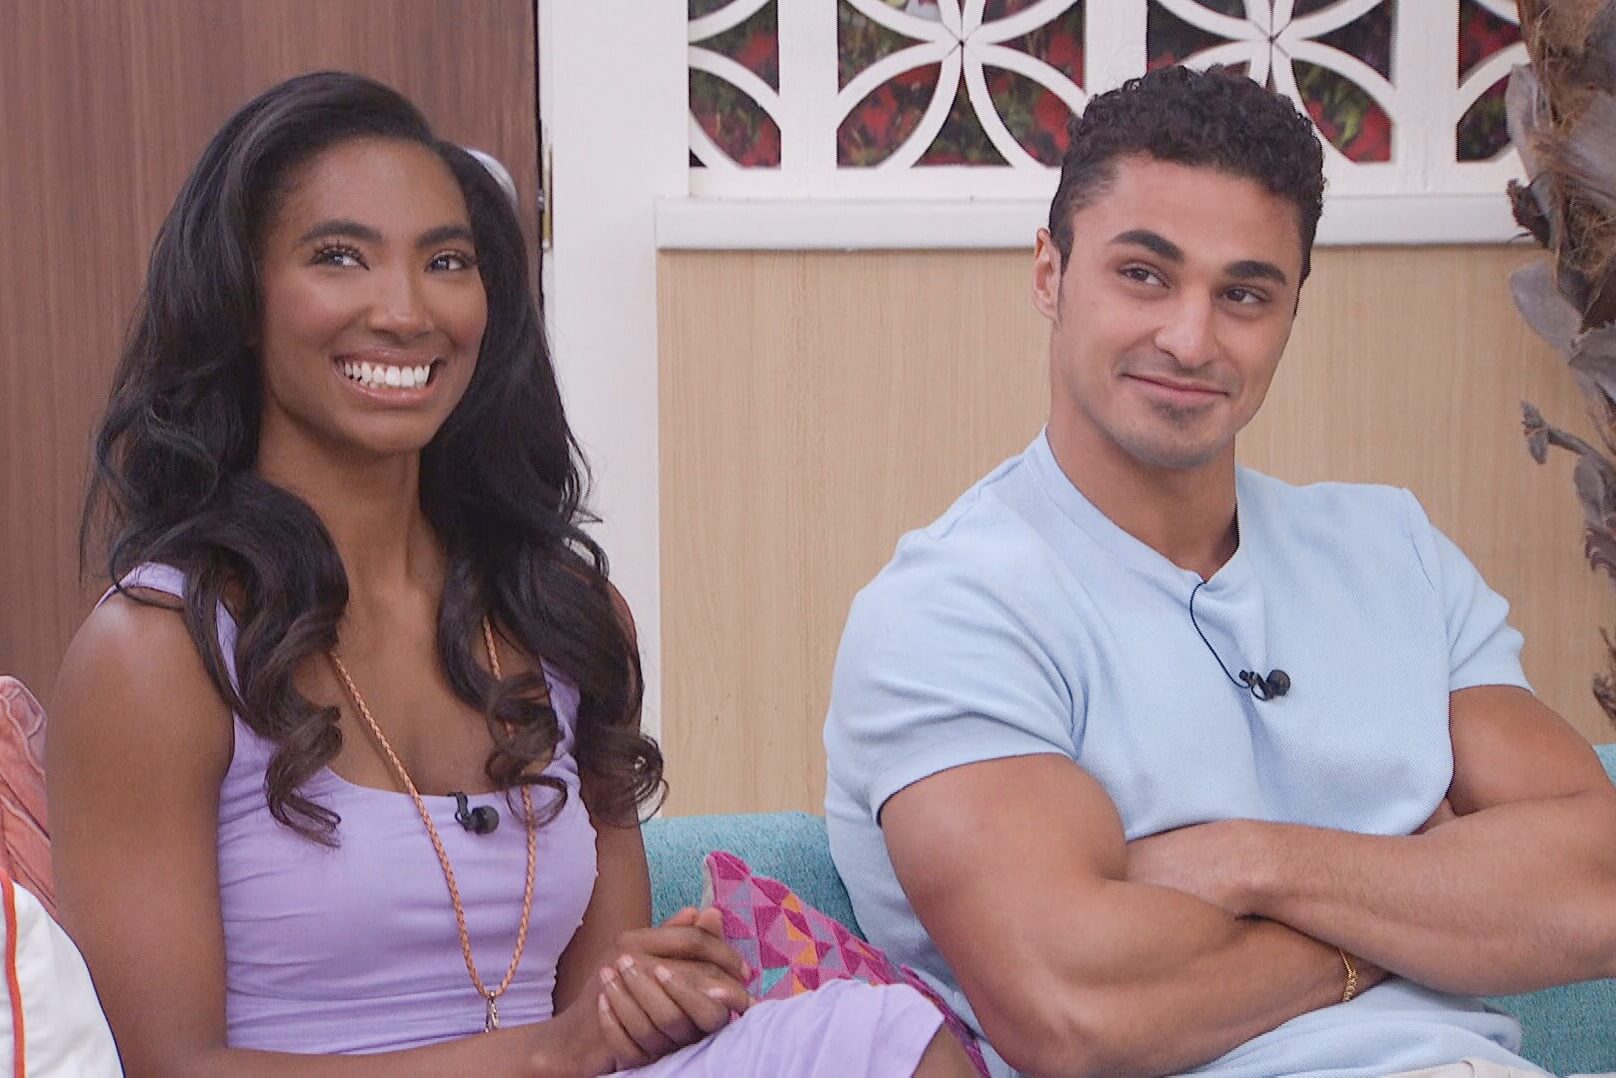 Taylor Hale and Joseph Abdin, who met on the CBS show 'Big Brother' during season 24, sit on the couch next to each other. Taylor wears a light purple dress. Joseph wears a light blue shirt.